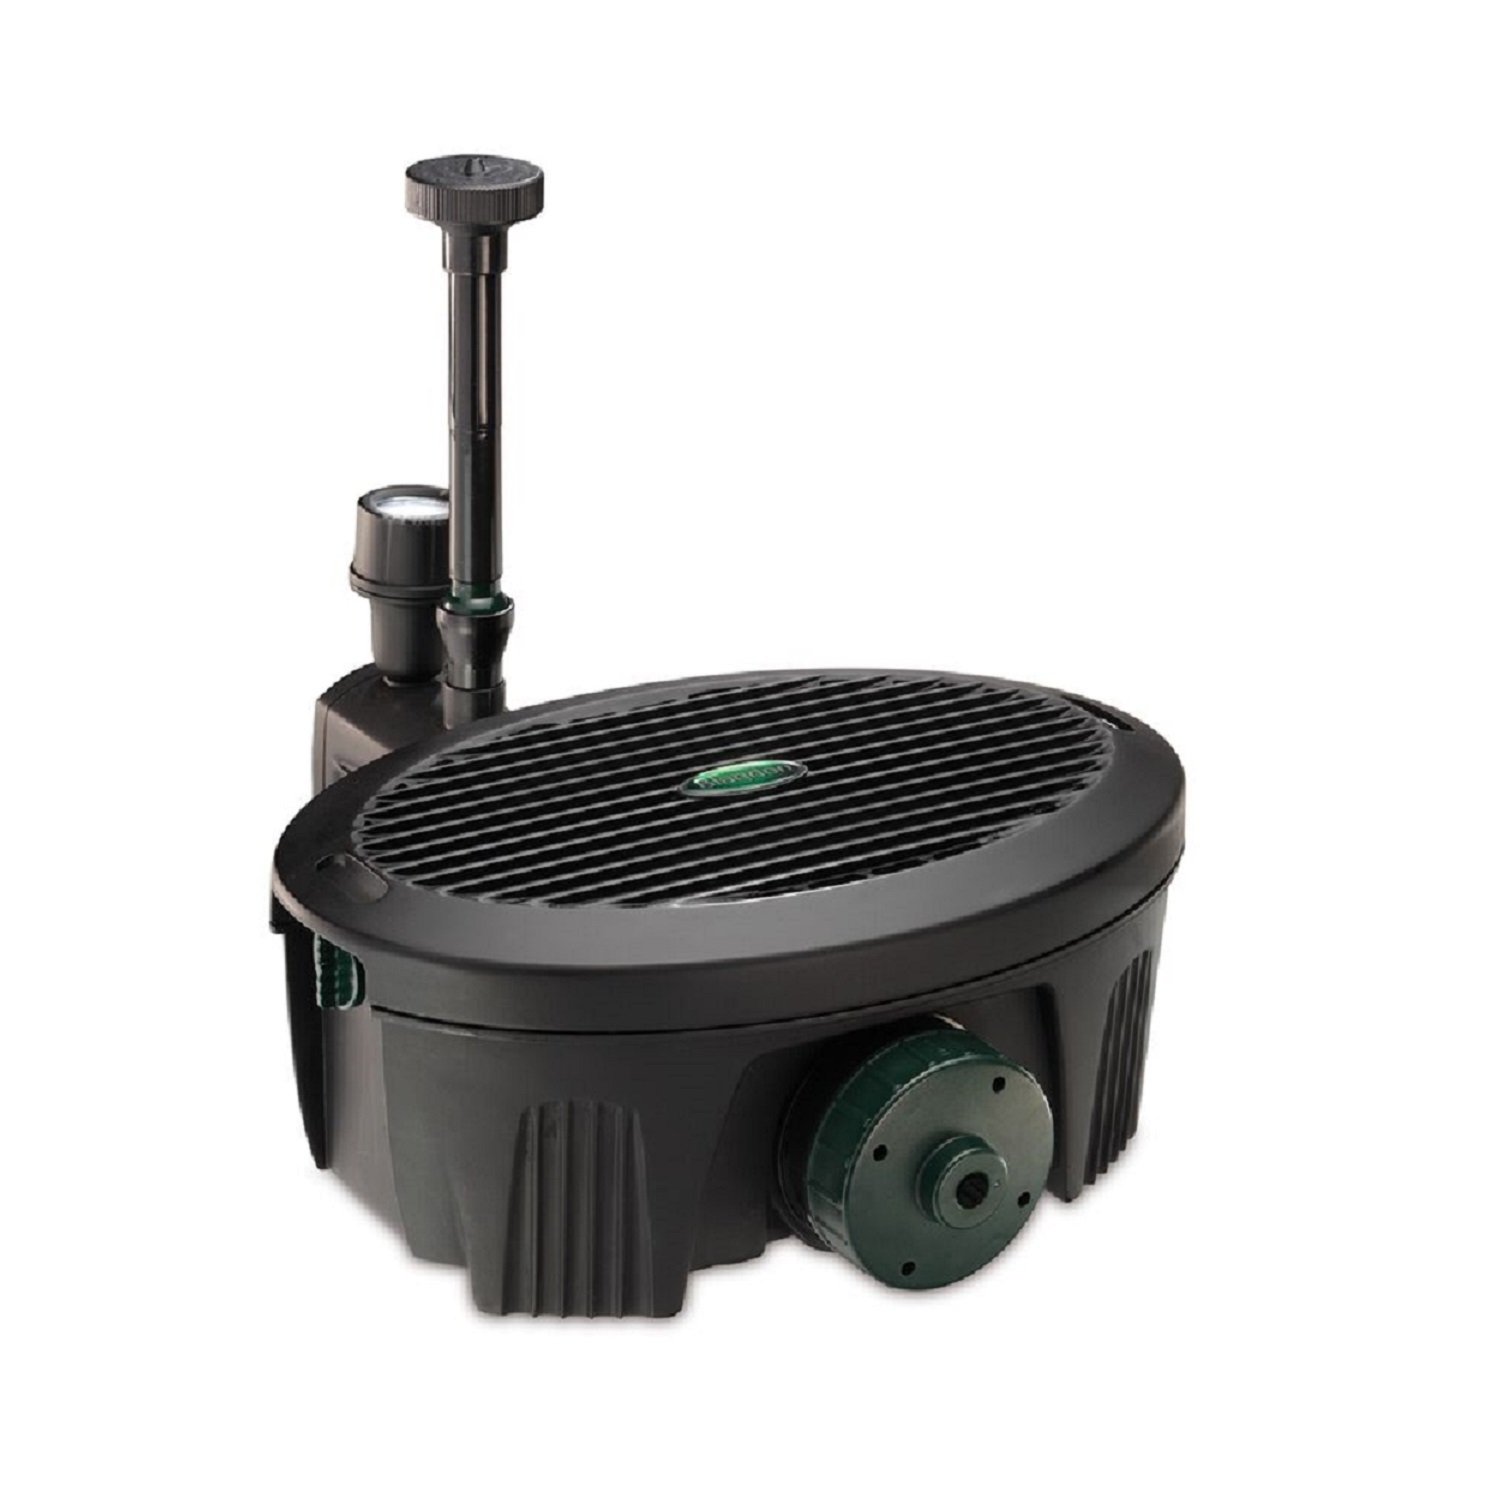 Blagdon Inpond 5-in-1 2000 Pump Filter with LED Image